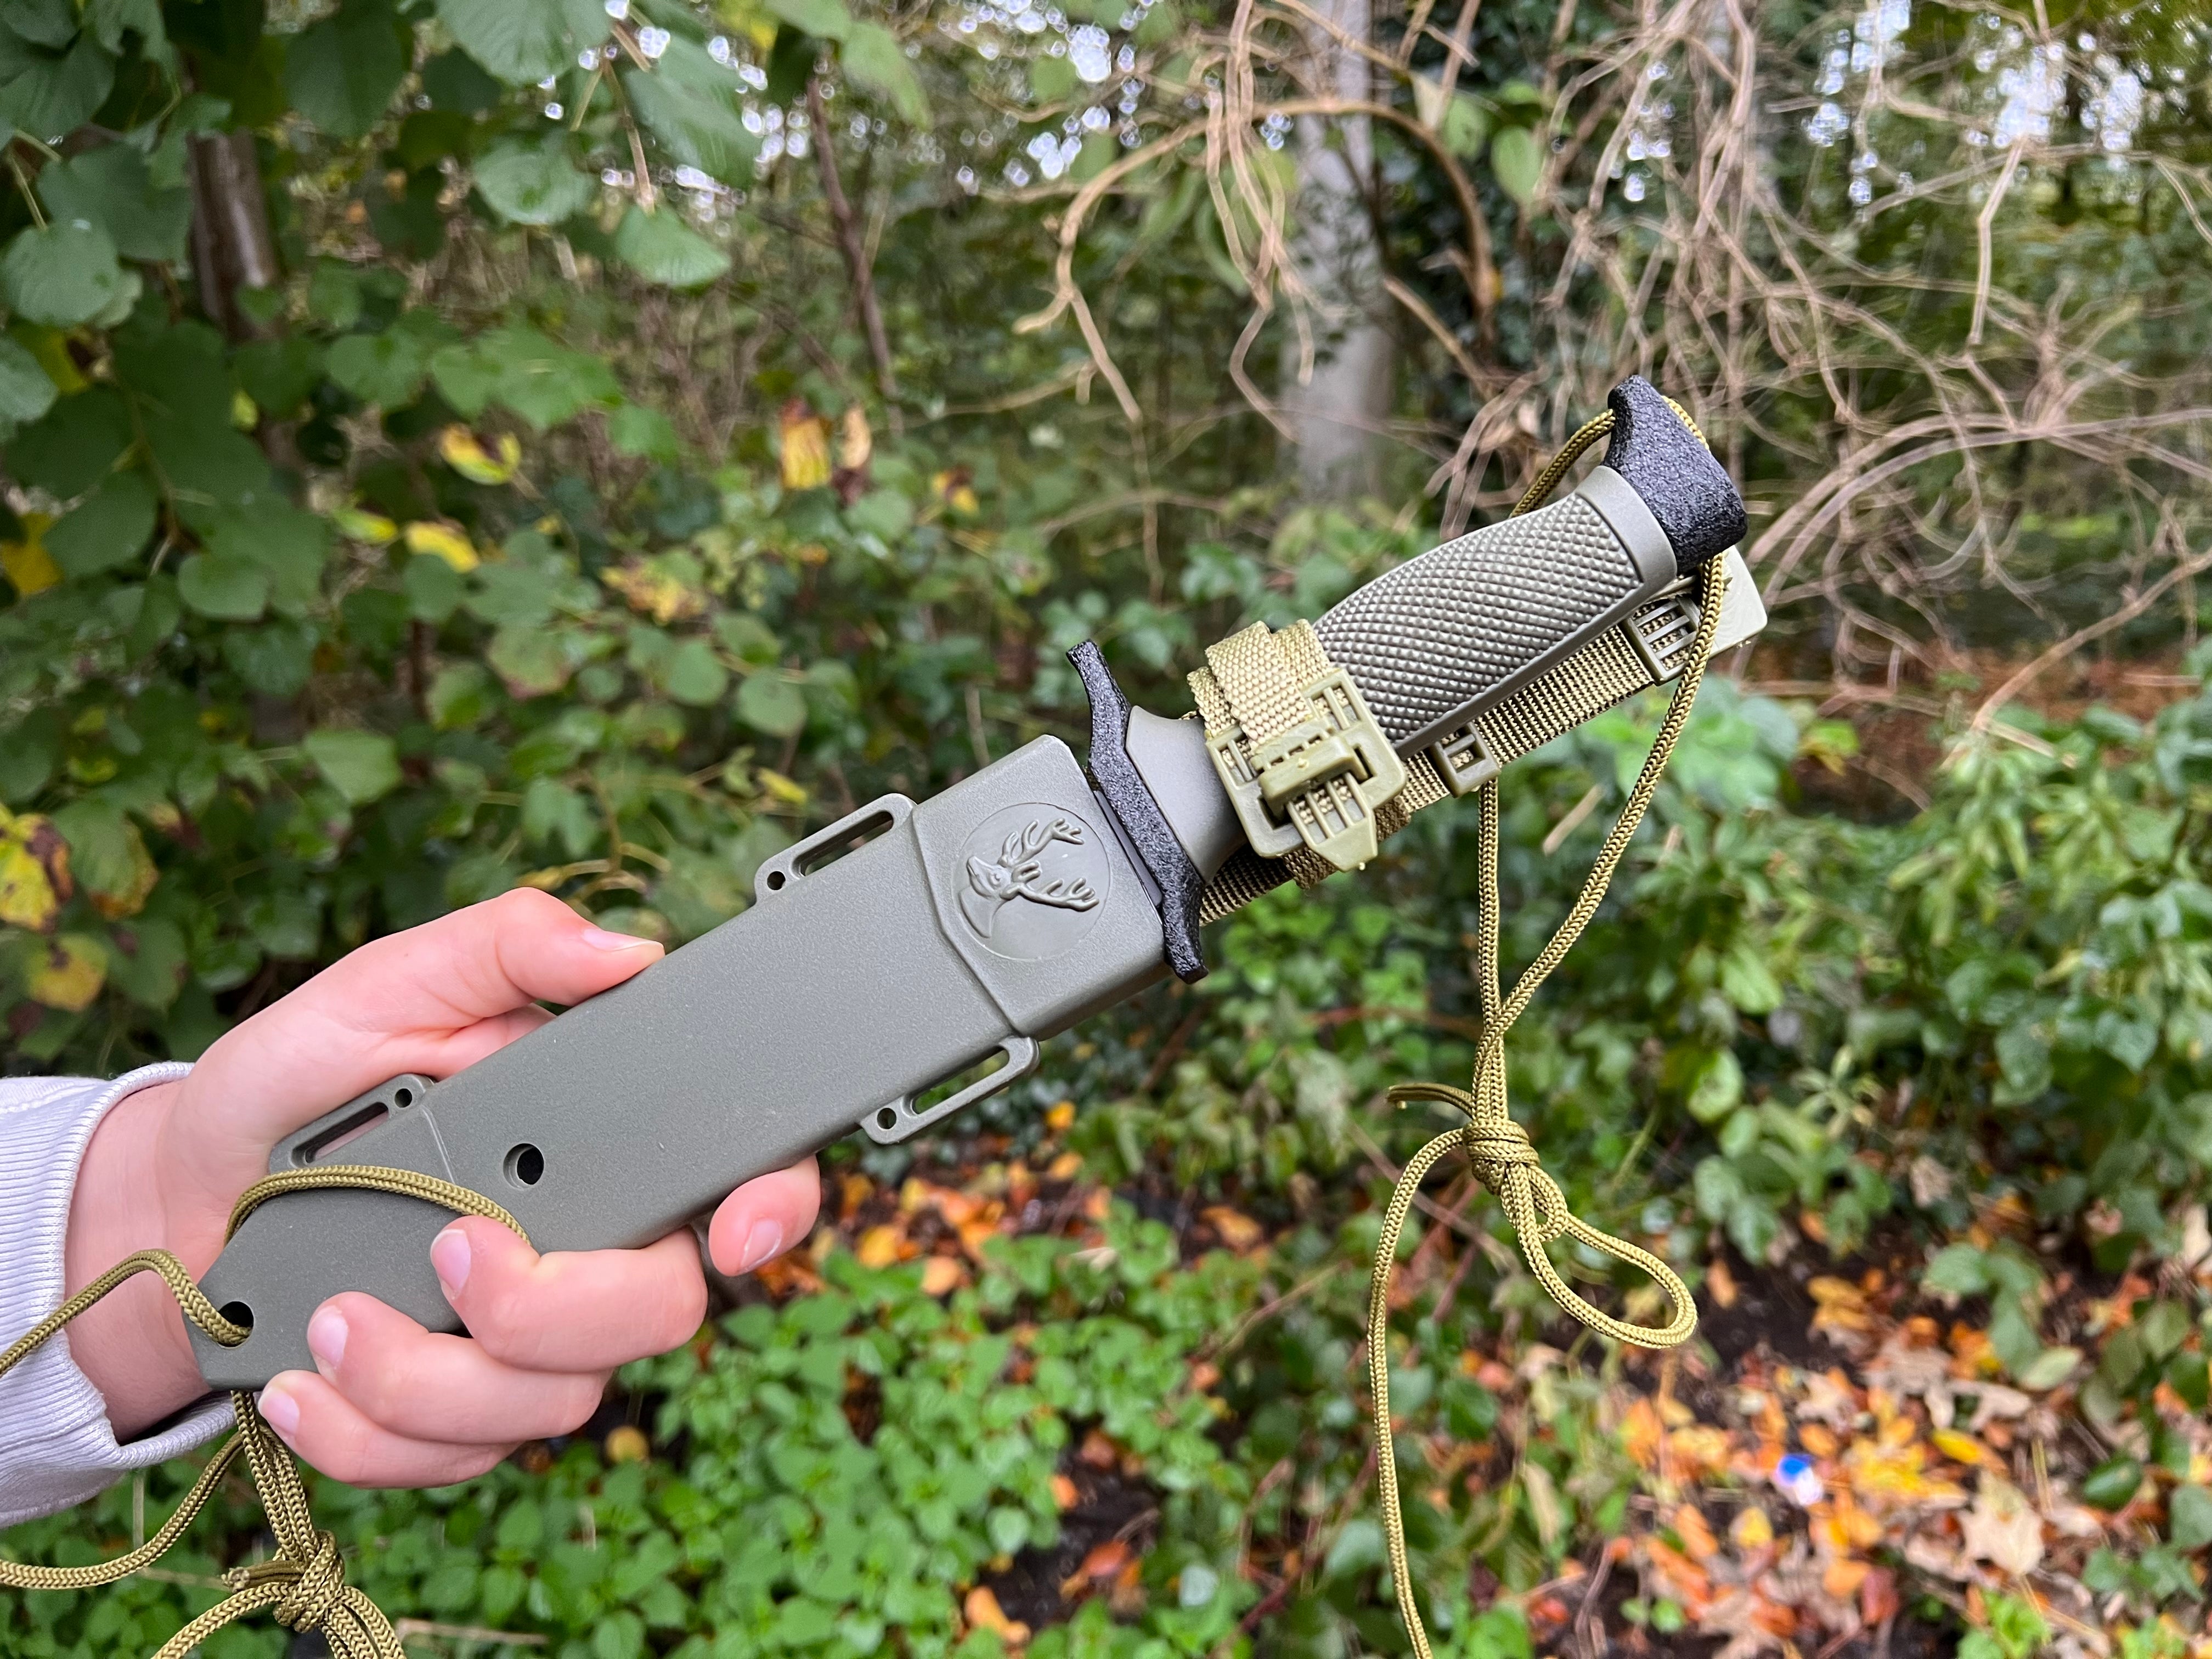 Survival knife "Rambo Tactical"-outdoor companion with hard anodizing and rigid holster